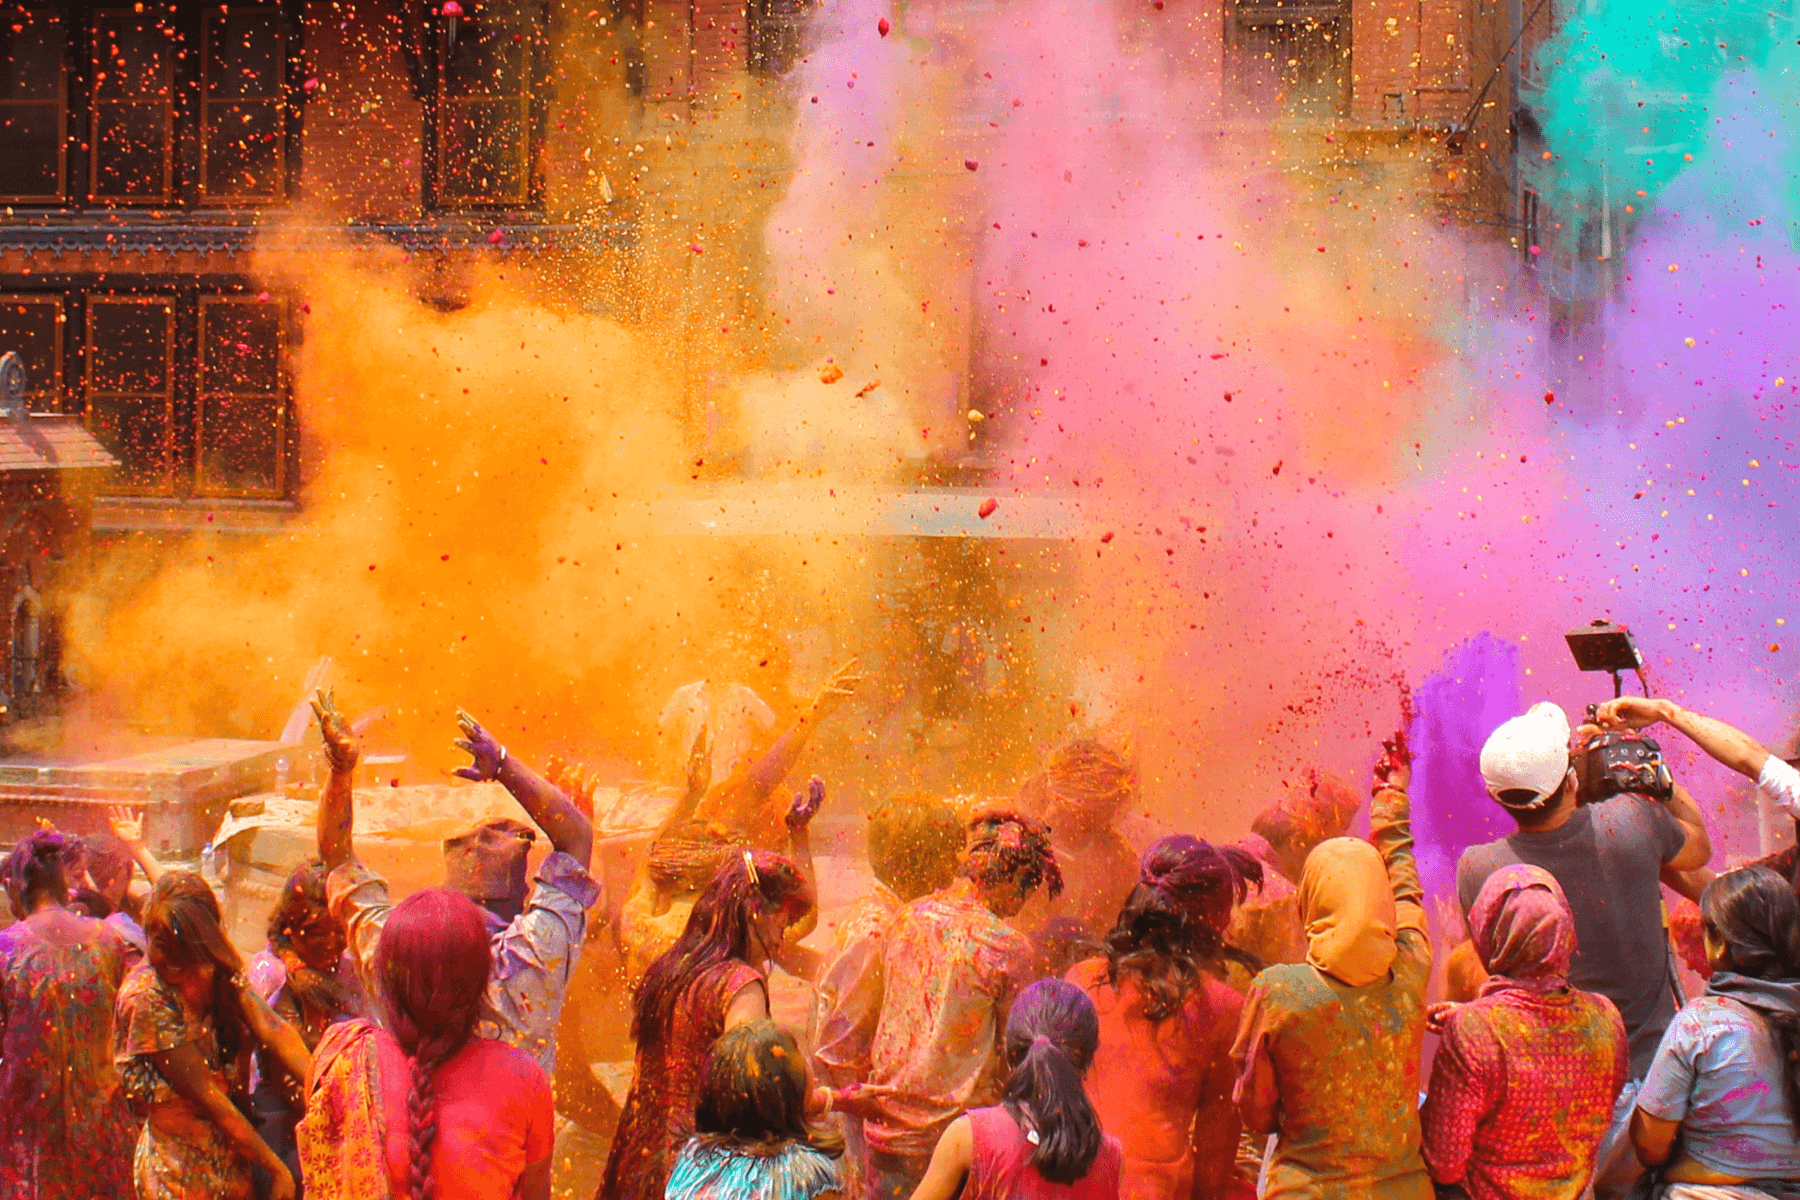 A group of revelers throw colors in the air at a Holi celebration.